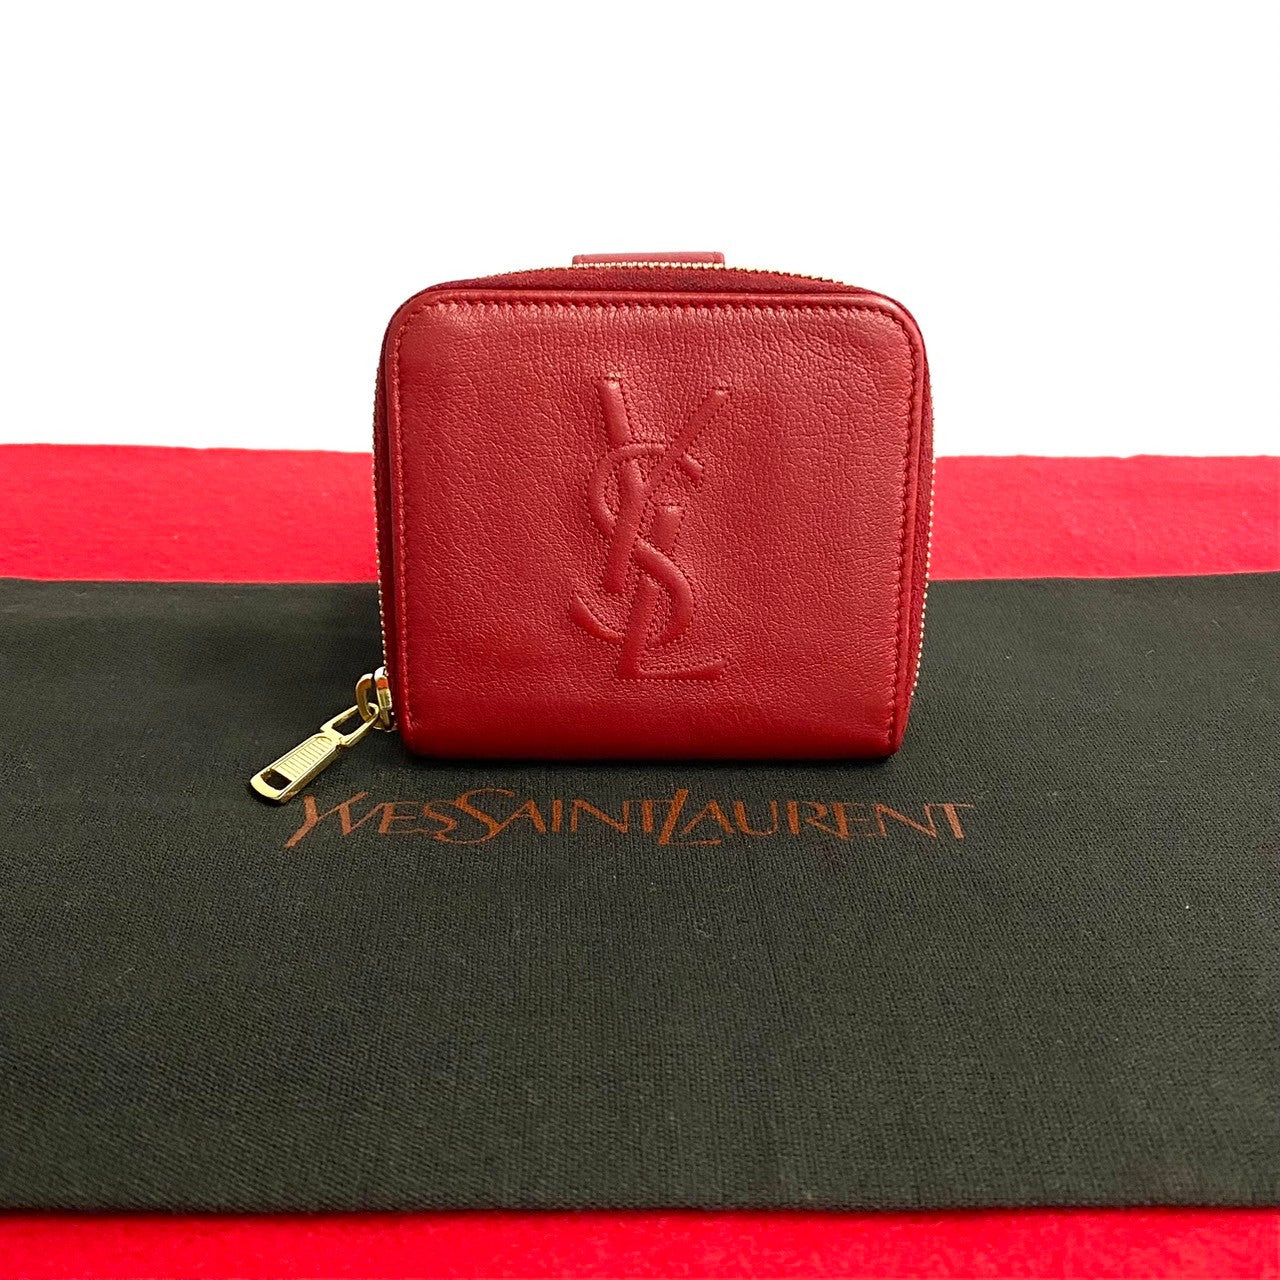 Yves Saint Laurent Leather Zip Bifold Compact Wallet Leather Short Wallet in Good condition